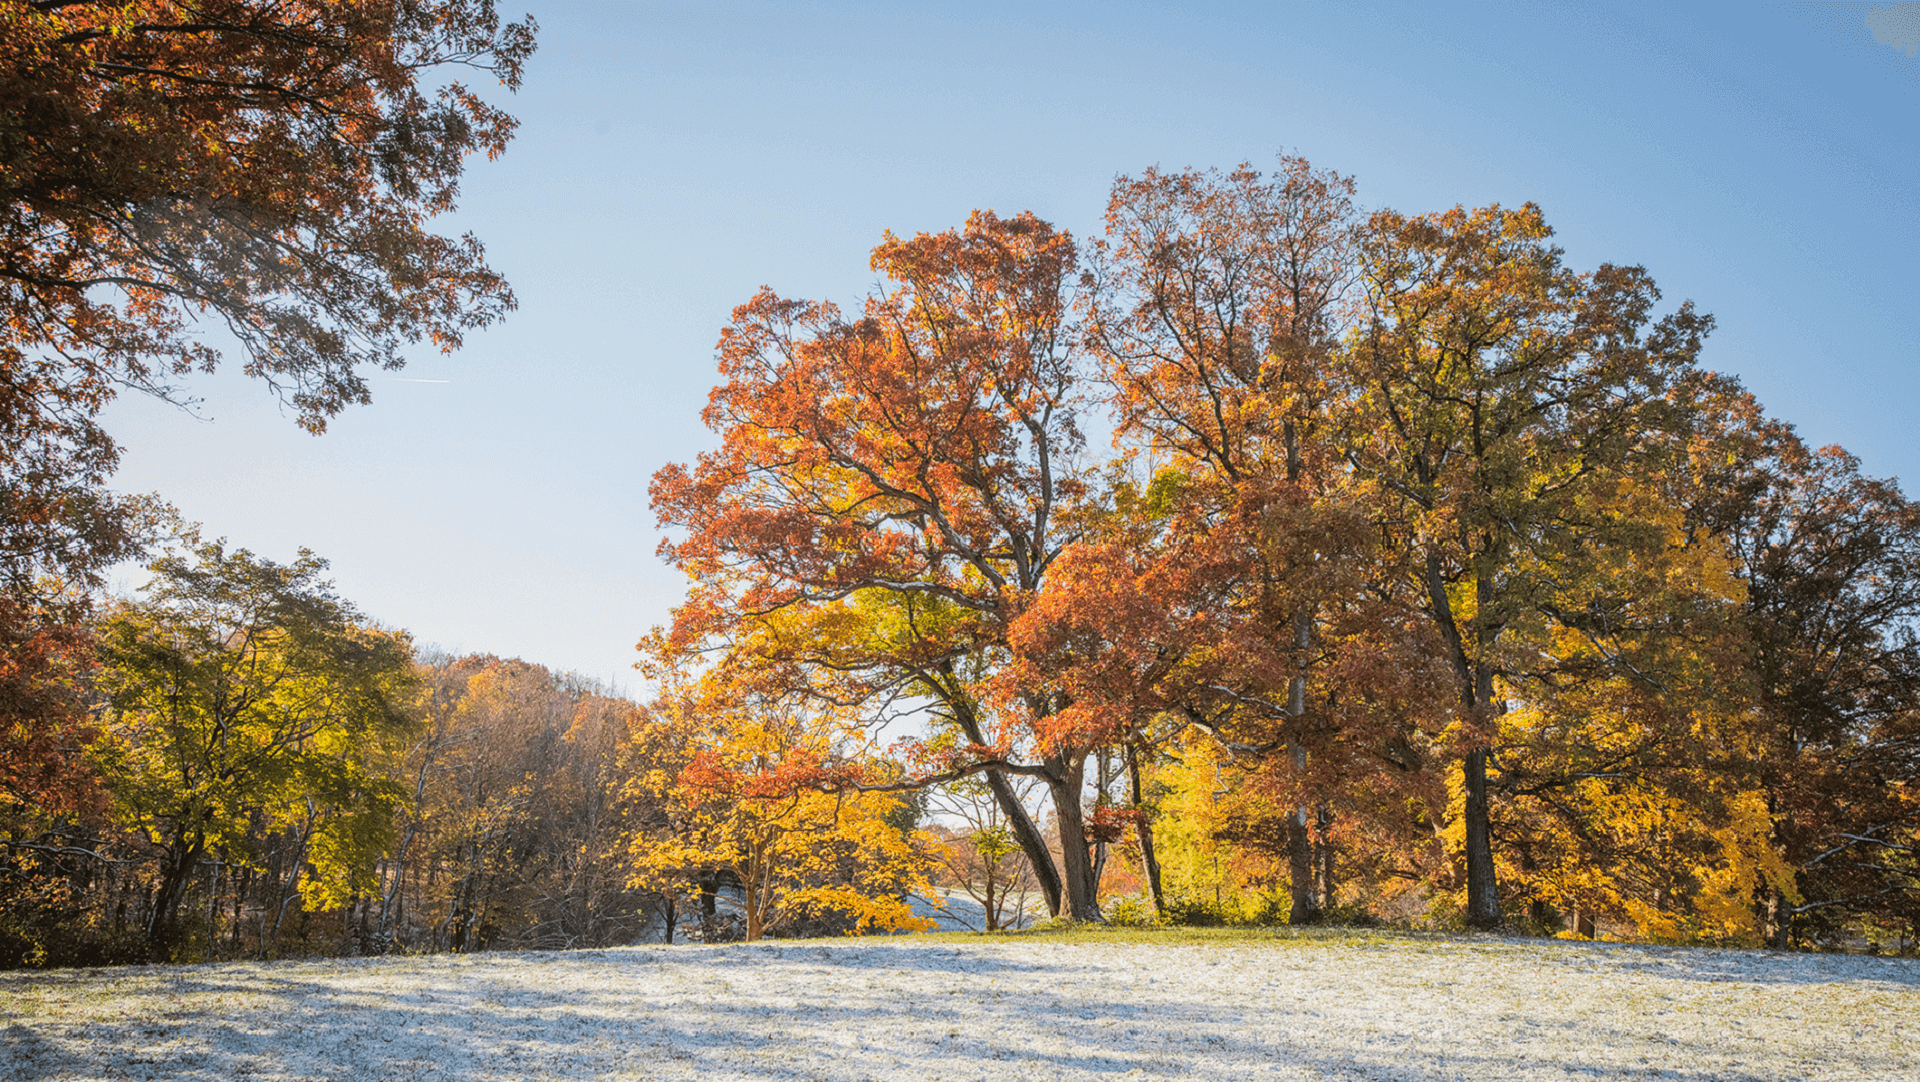 Photograph of tree displaying fall color with snowy ground